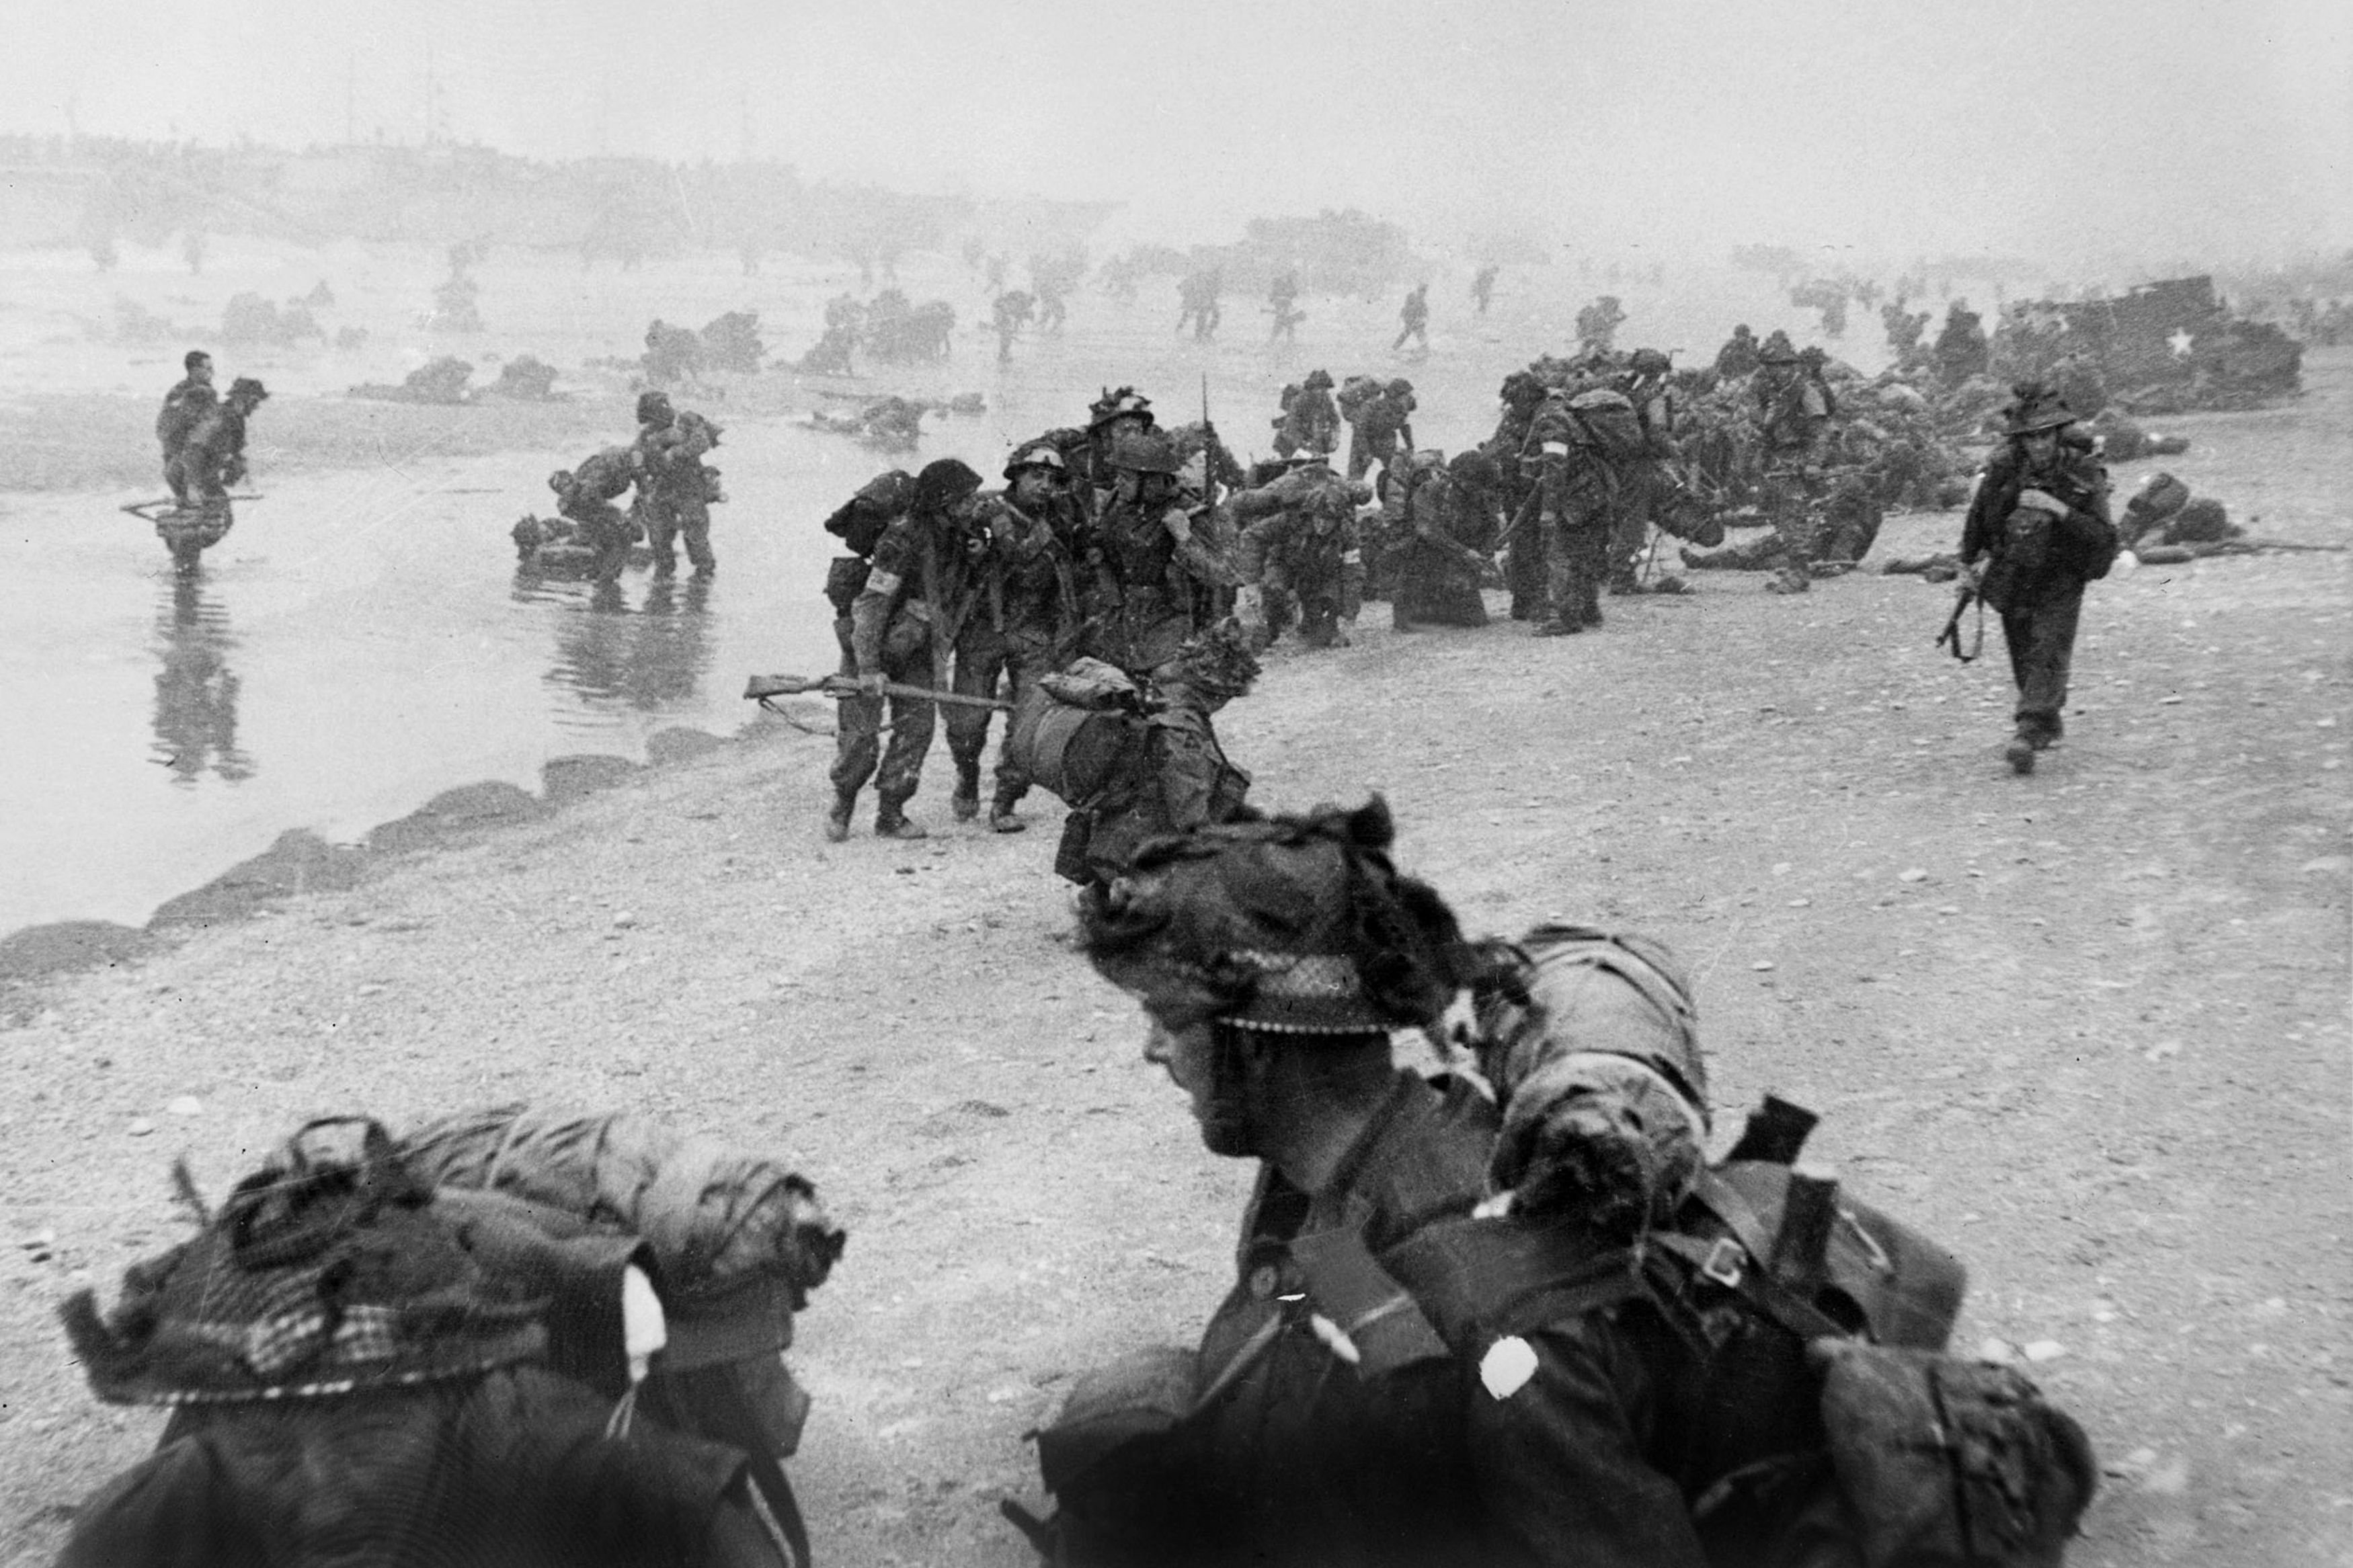 Most people under 35 do not know what D-Day was